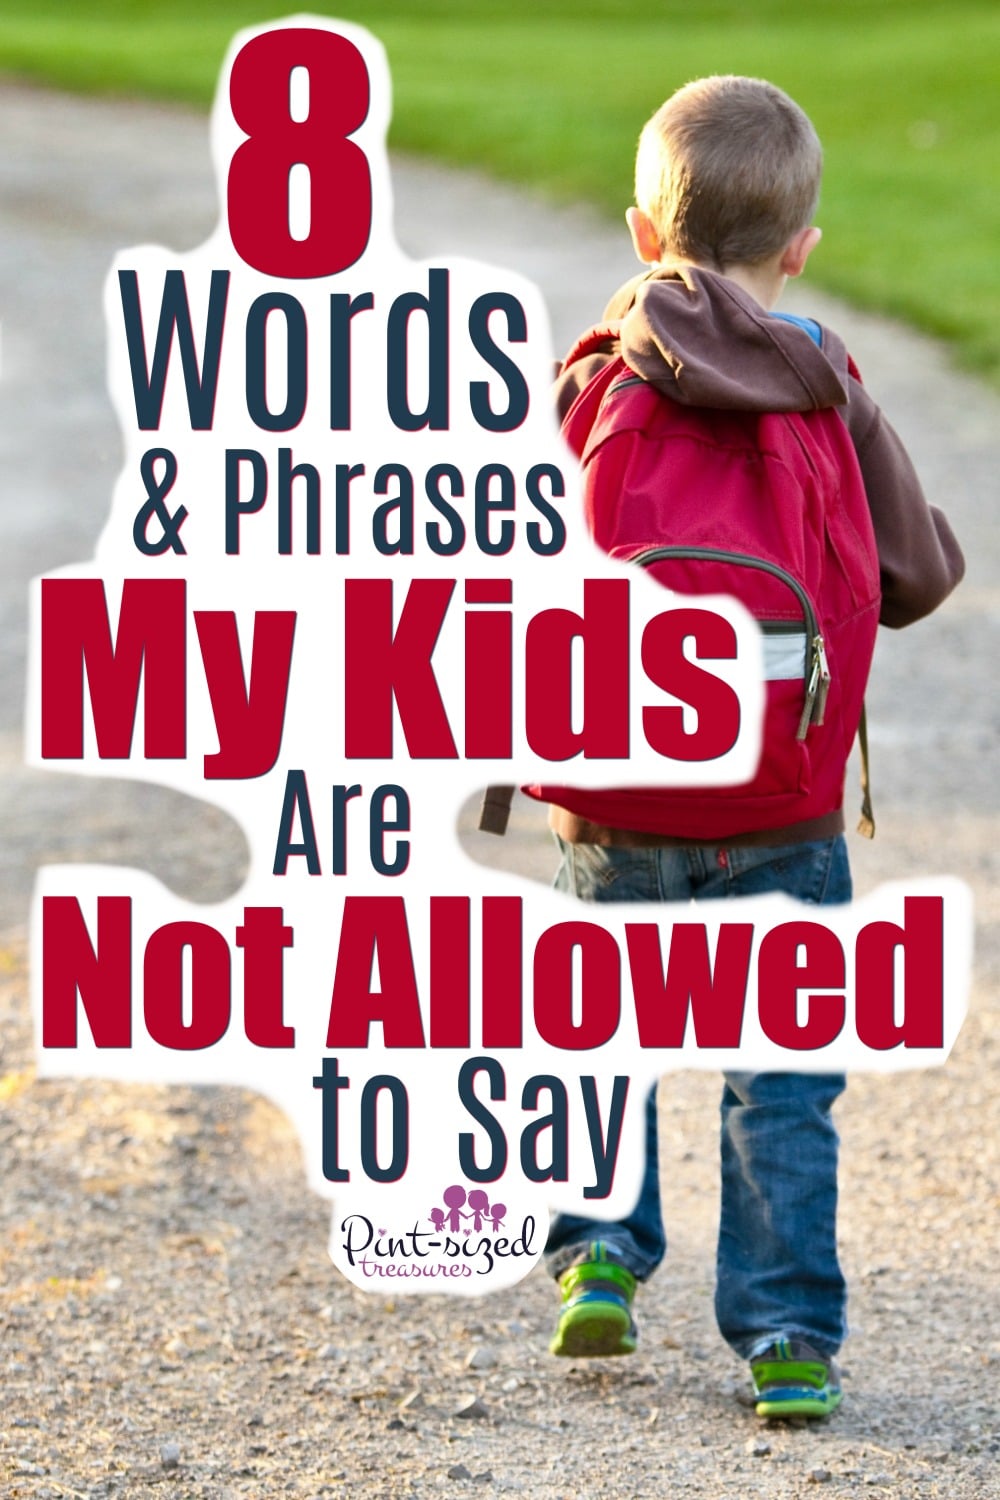 Stupid and shut-up are just two of the words not allowed in our home. We want our kids to have vocabulary that's pleasing to God. That's why these 8 words and phrases are off limits in our home. No kids are allowed to say them...period! A great parenting read for intentional parents!